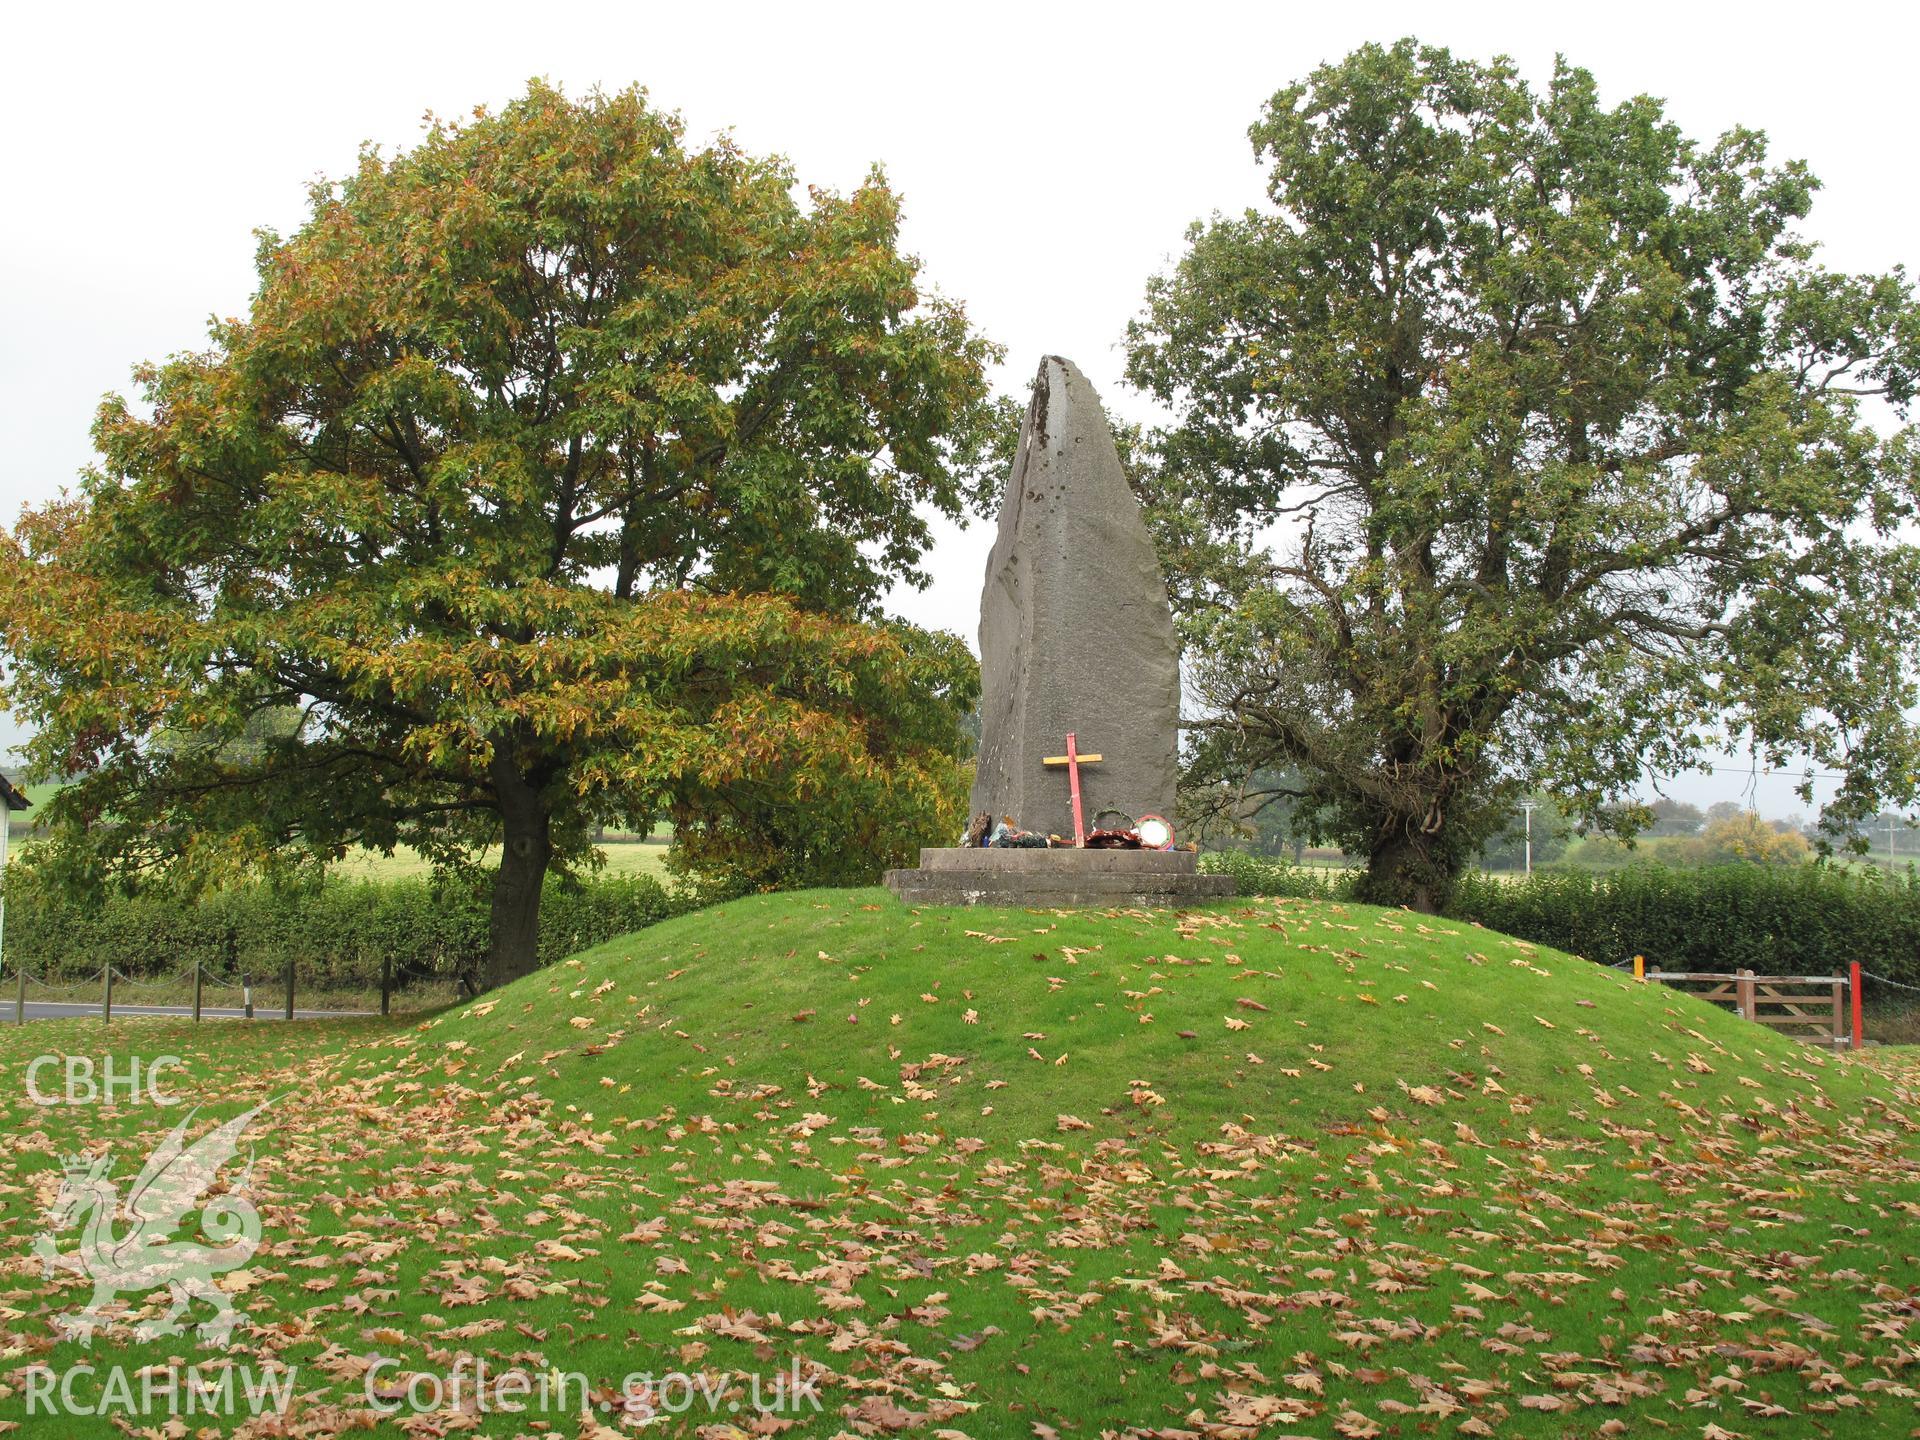 Llywelyn Monument, Cilmeri, from the south, taken by Brian Malaws on 07 October 2010.